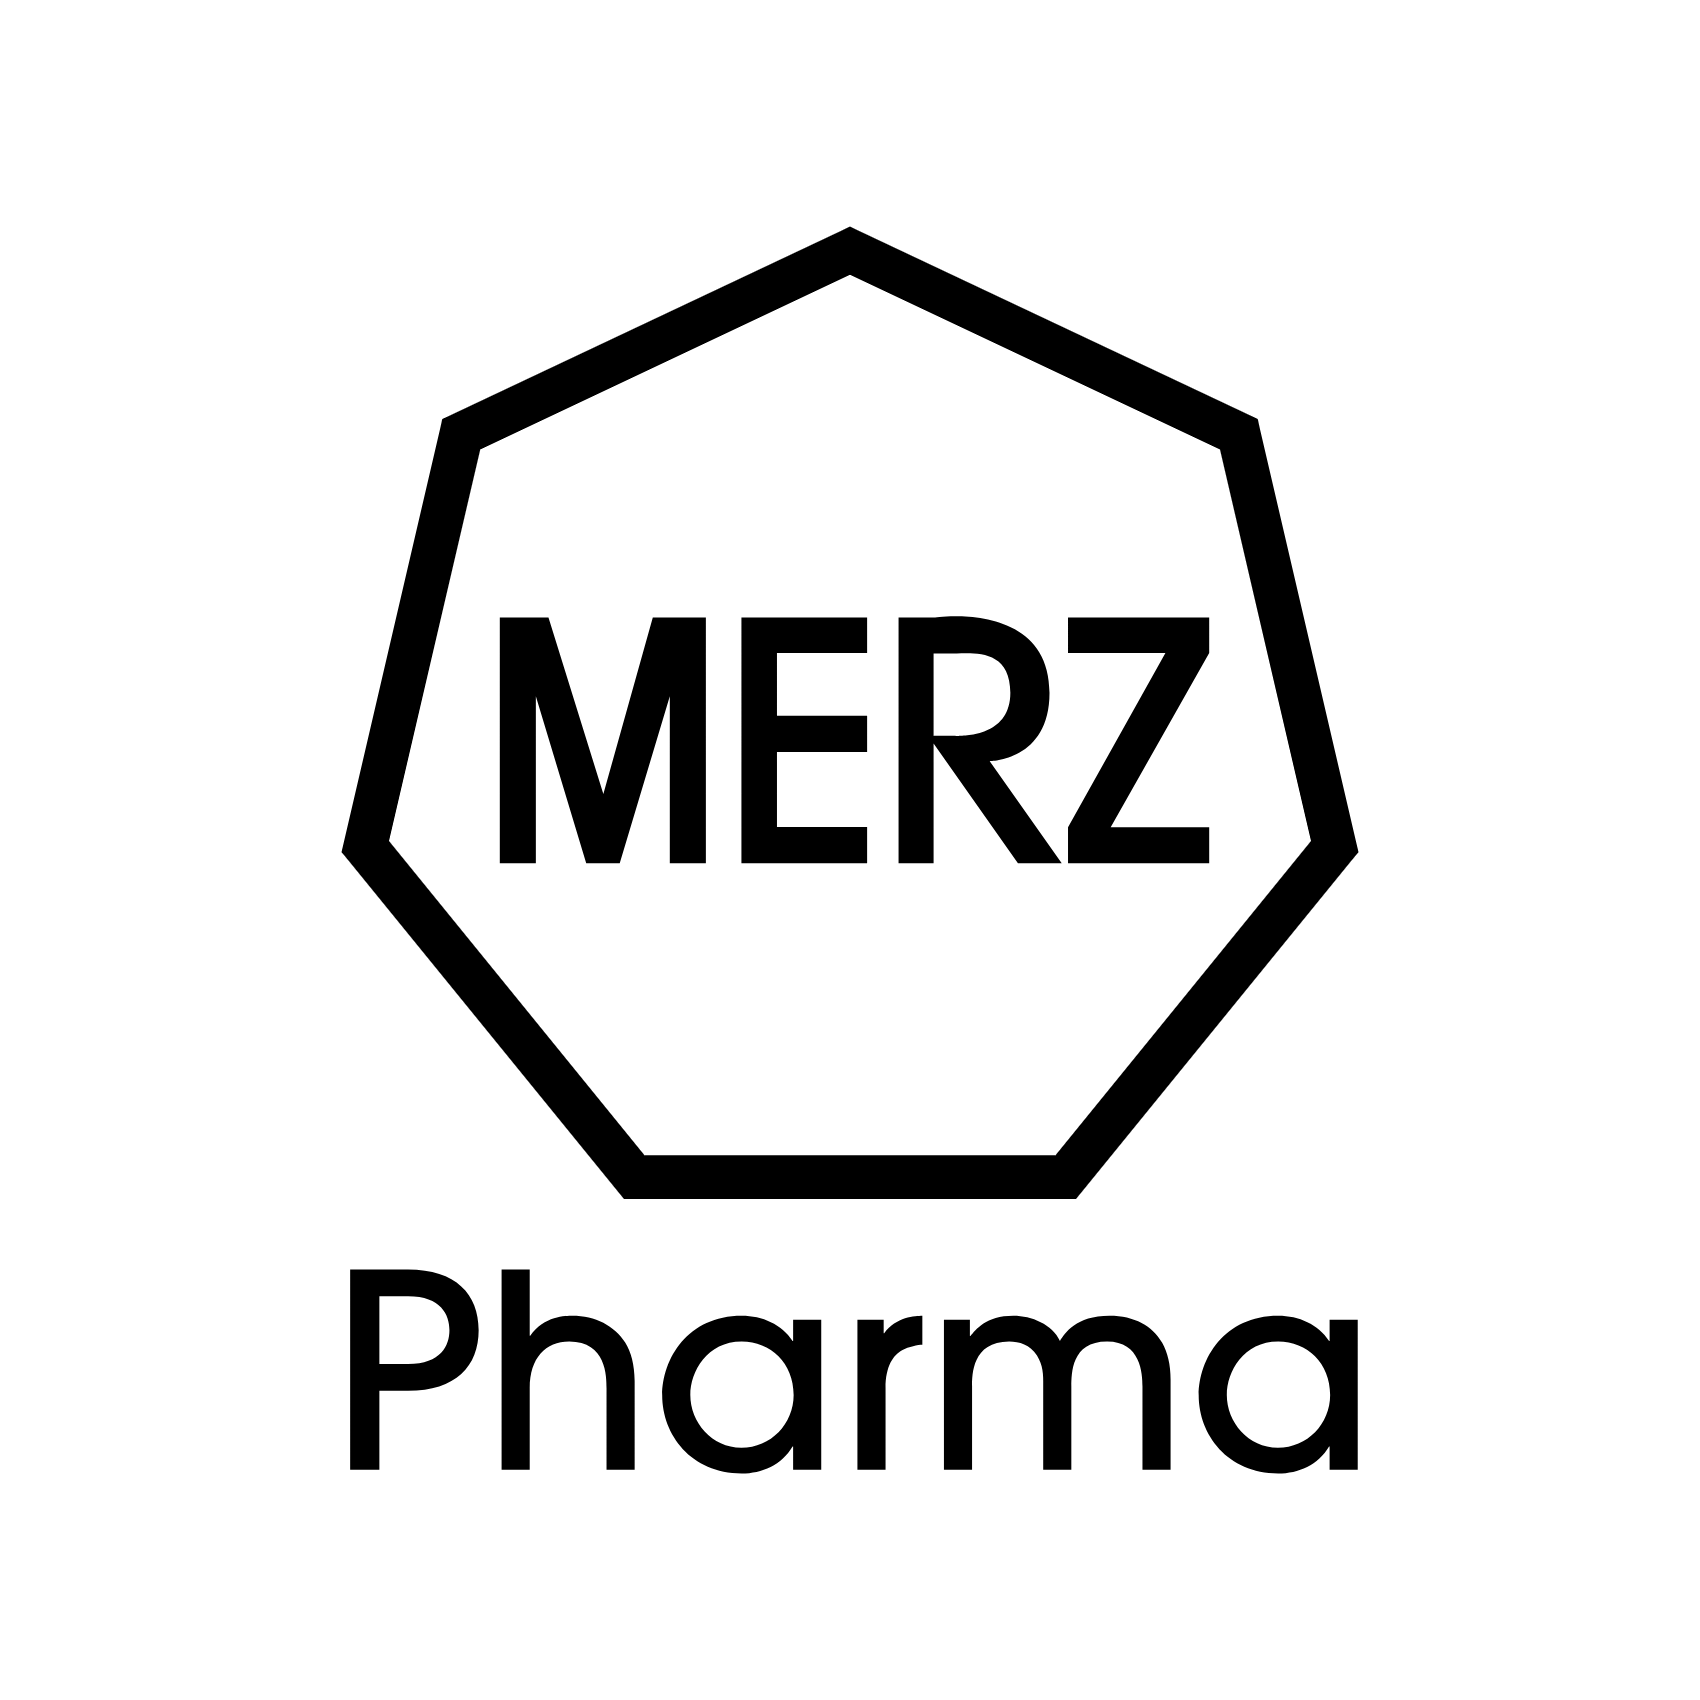 Download Merz Pharma Logo PNG and Vector (PDF, SVG, Ai, EPS) Free